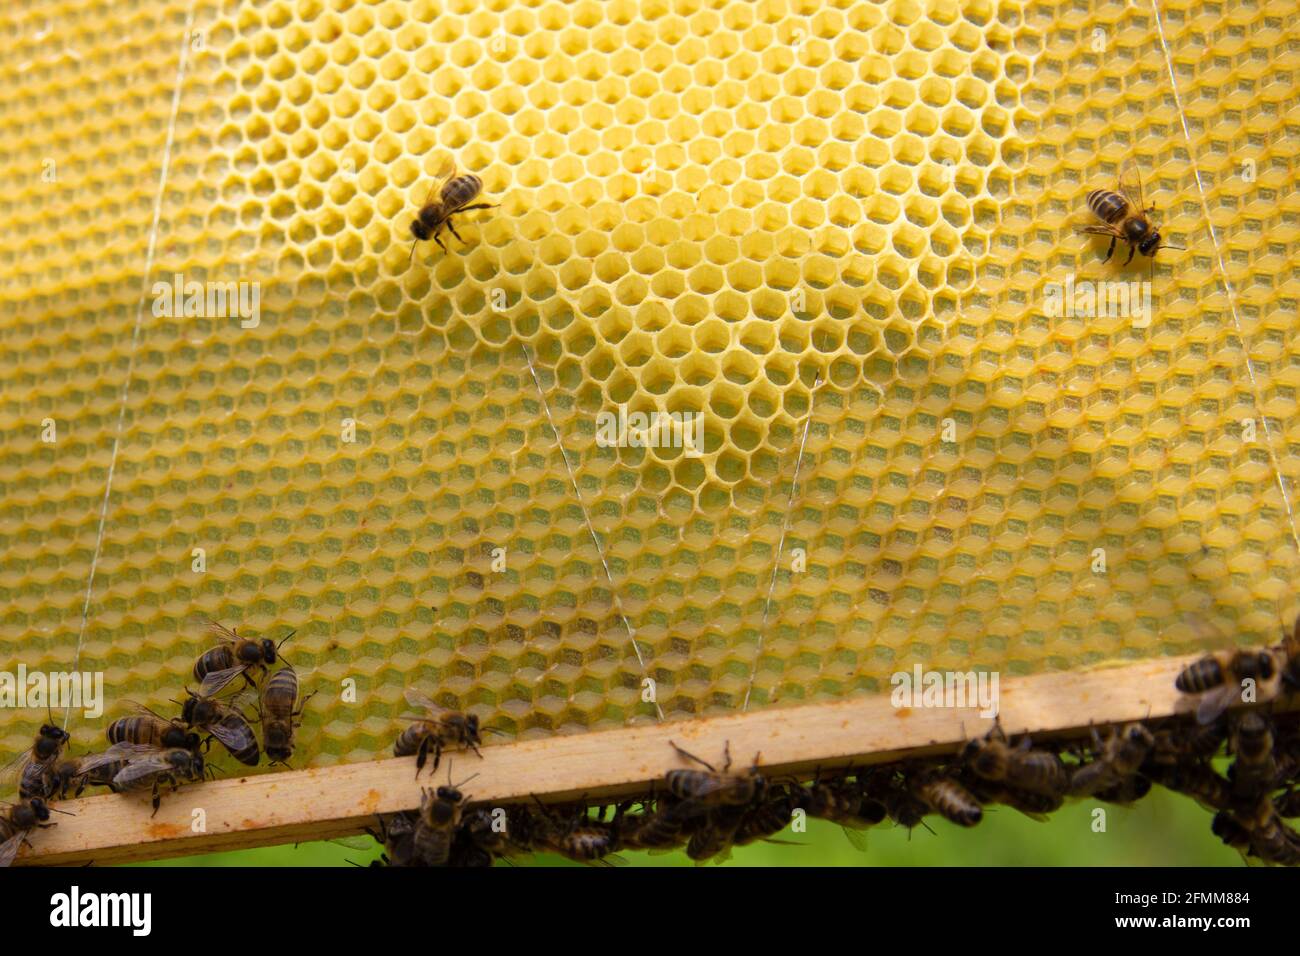 Brood frame with worker bees drawing new beeswax honeycomb Stock Photo